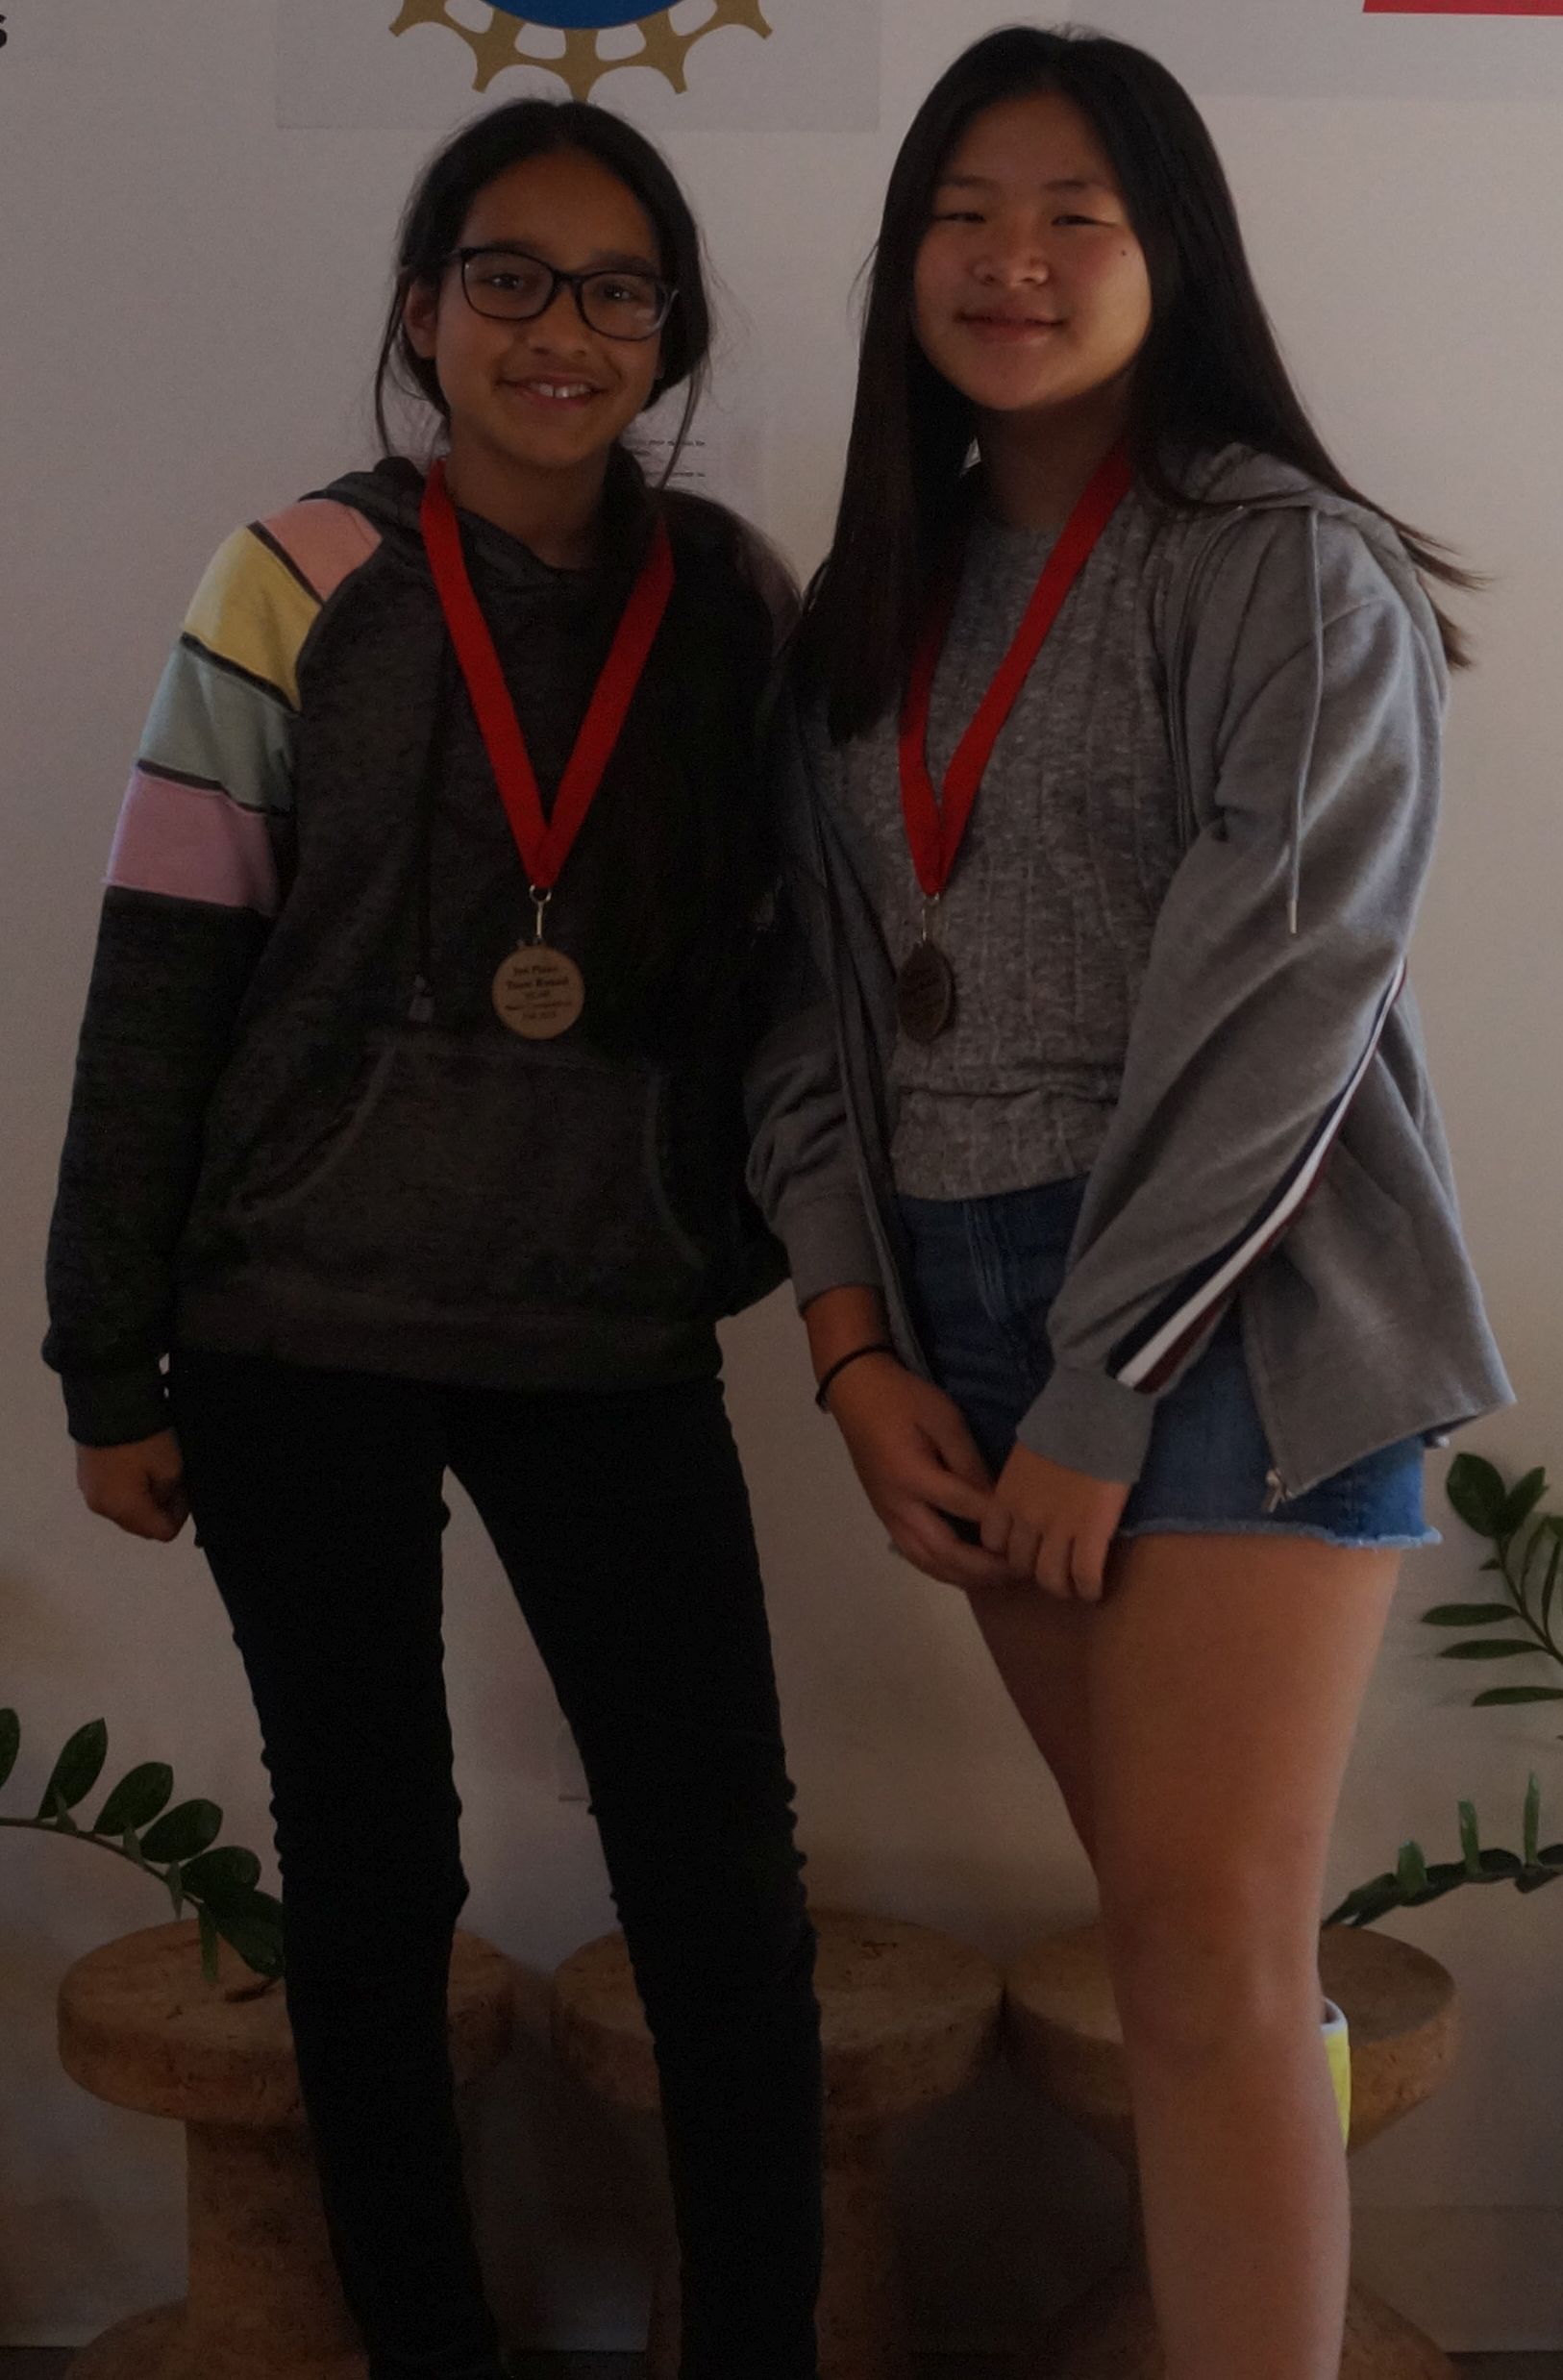  Kaylee and Sharon, BEAM 6 alum, won 3rd place in the team round representing Rise Kohyang Middle School.  